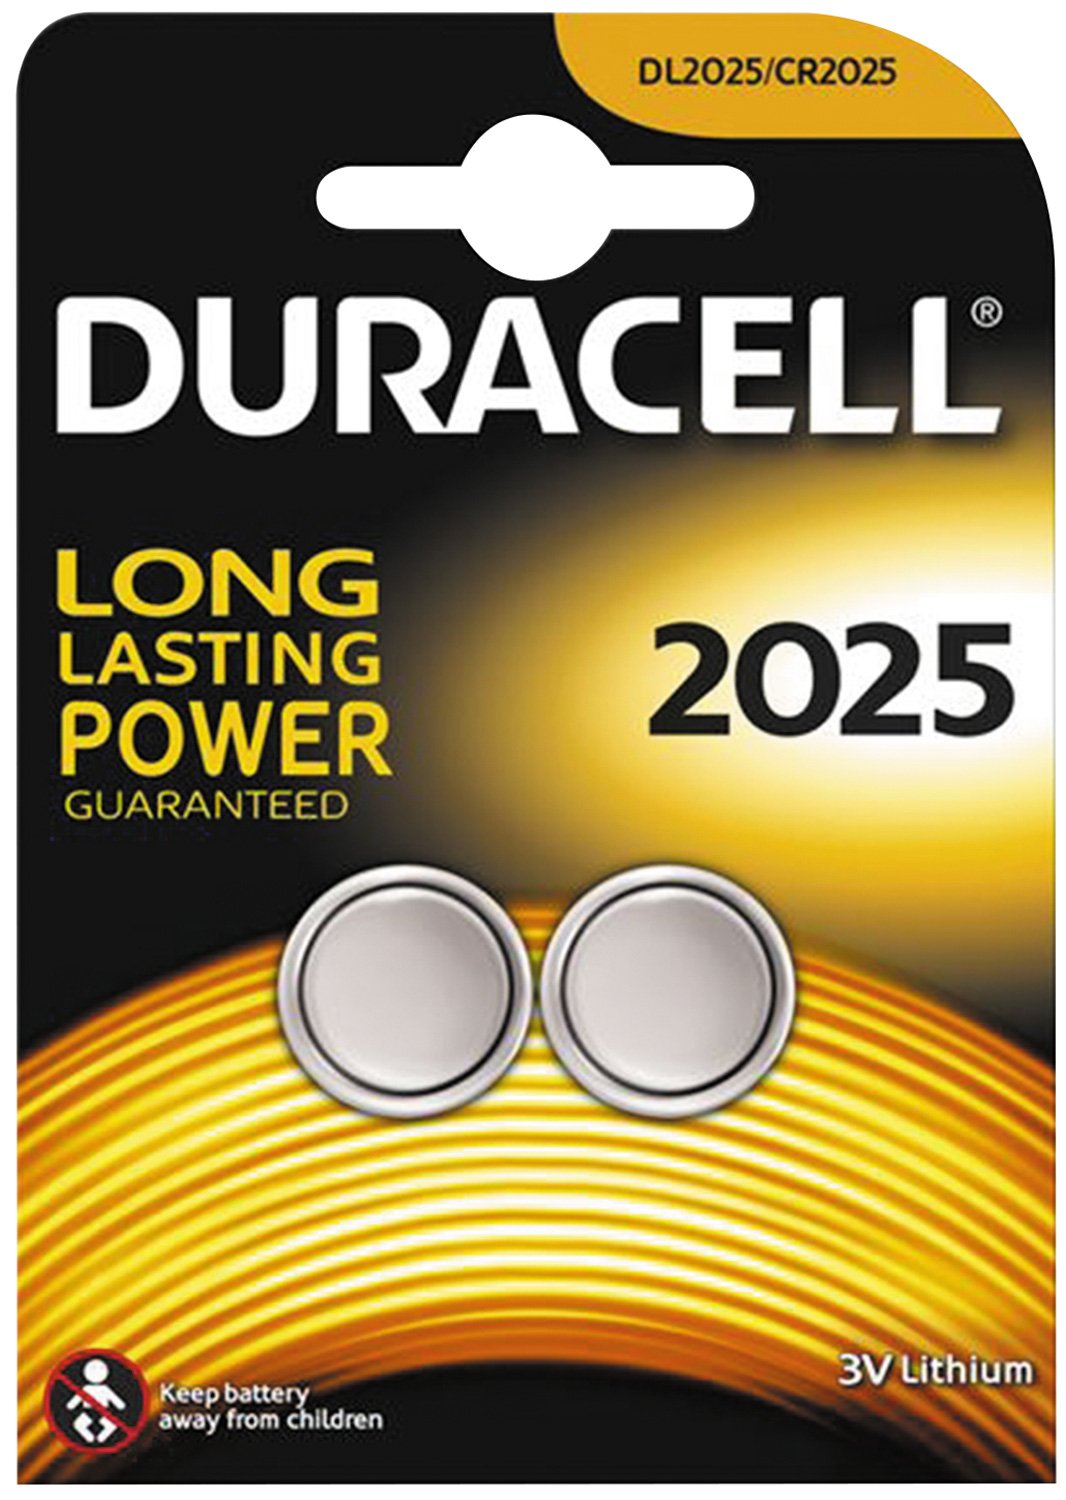 Duracell Lithium Coin Cell Battery CR2025 Duracell Lithium Coin Cell 2 Pack